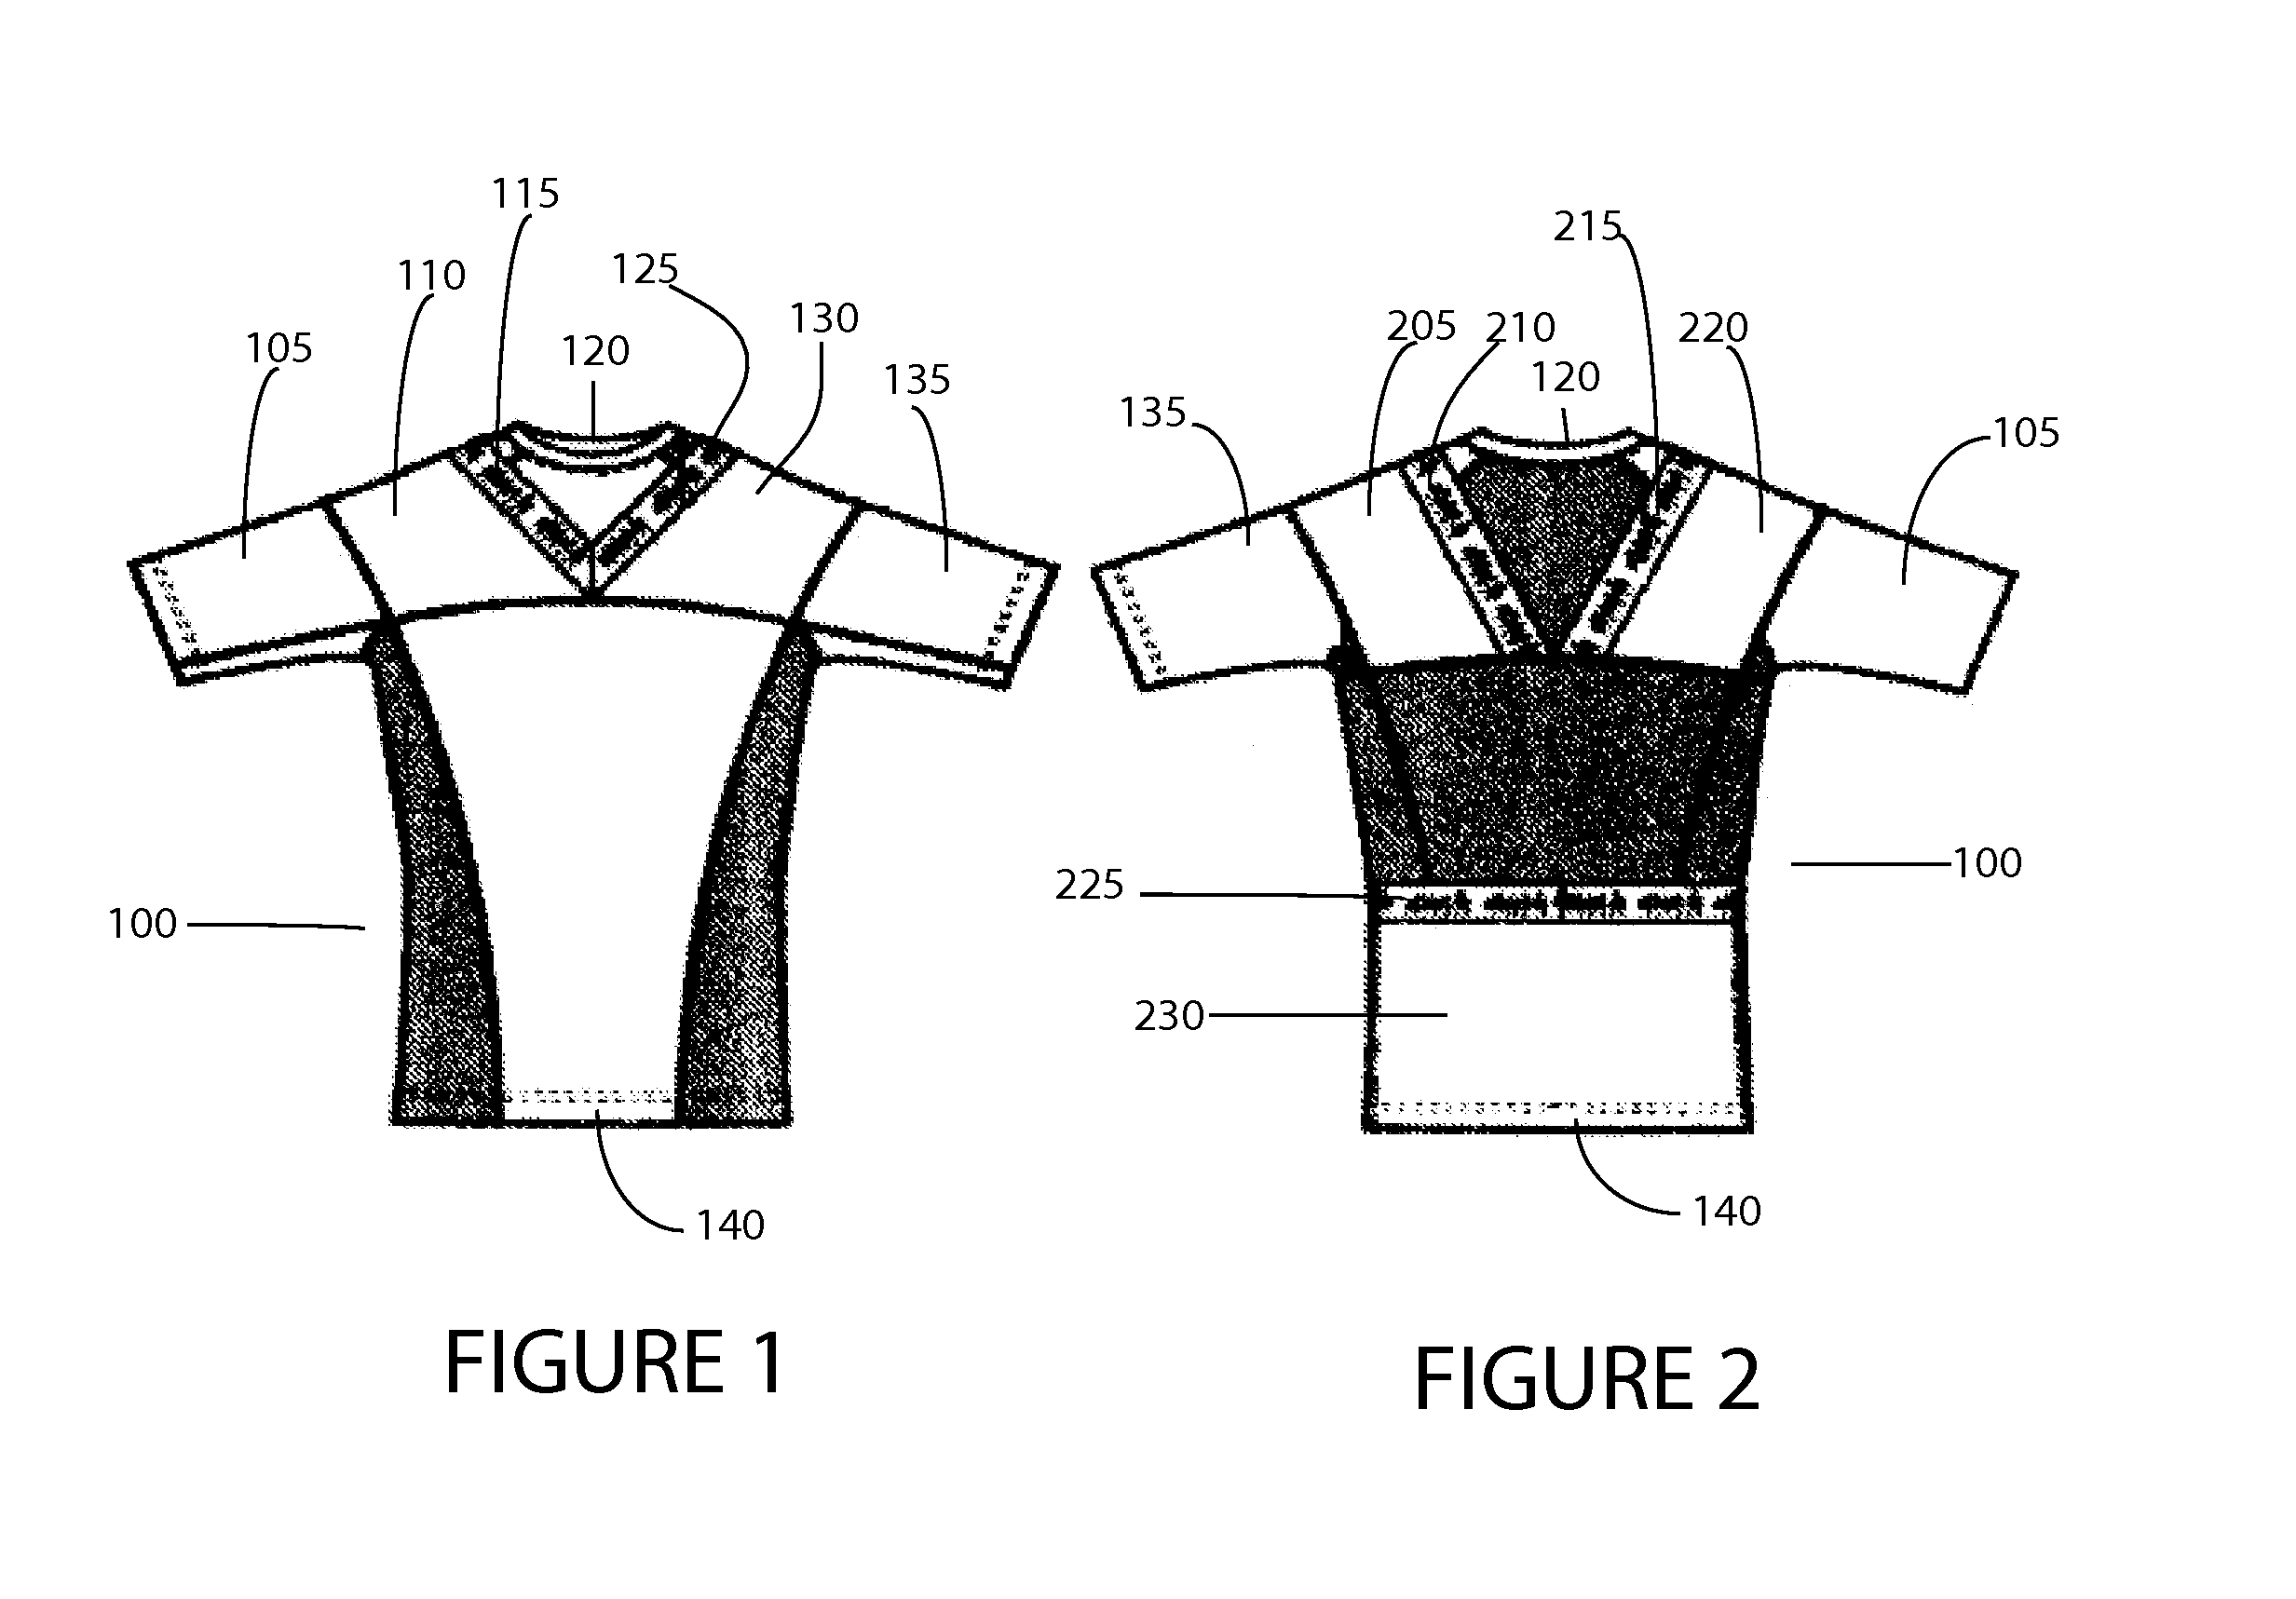 Thermal, elastic, tight-fitting garment with pockets positioned for thermal therapy